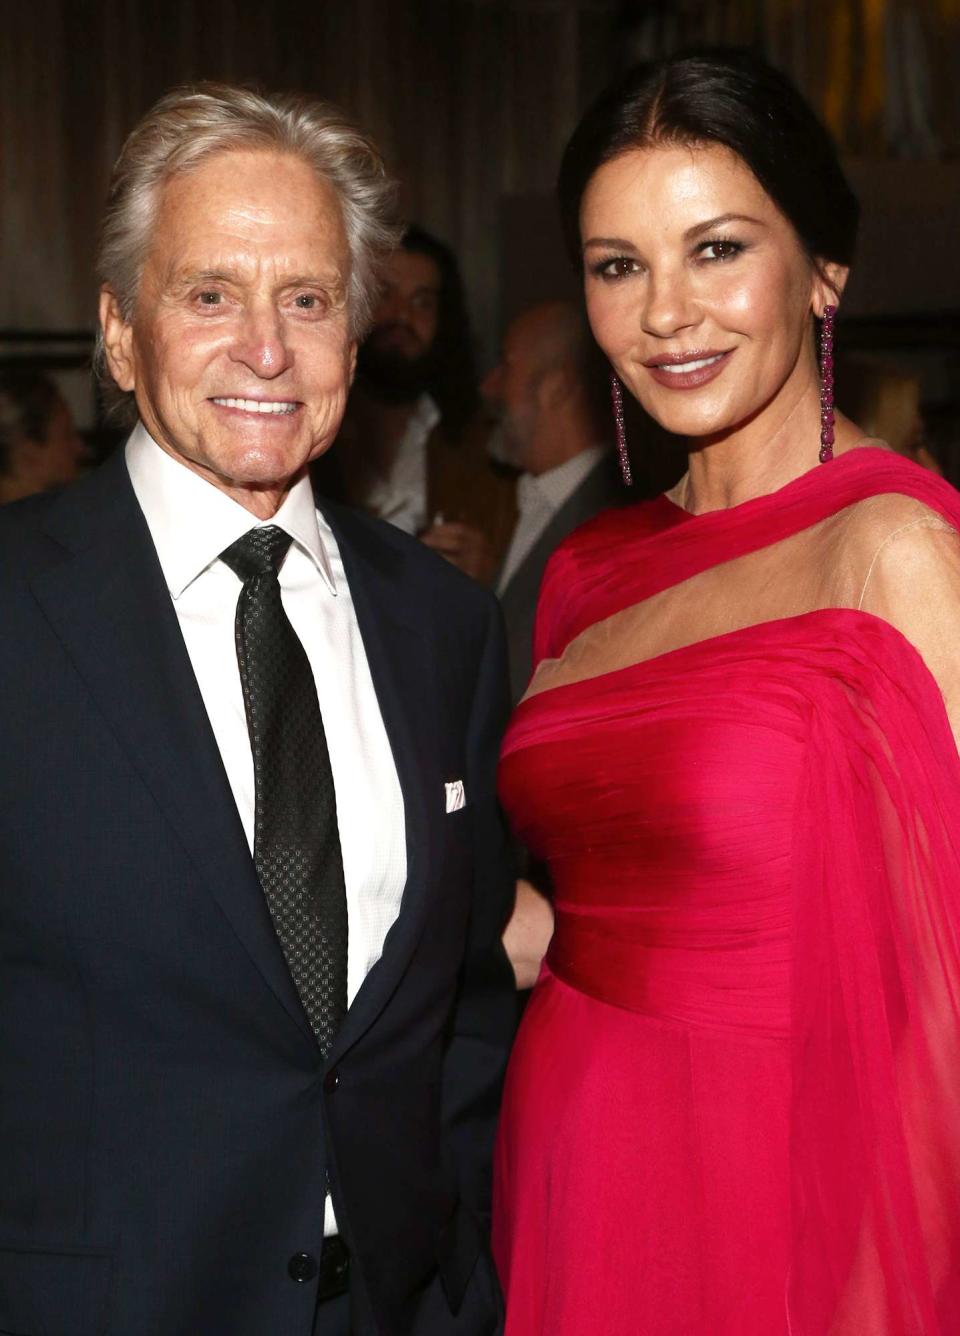 Michael Douglas and Catherine Zeta-Jones attend the Netflix's 71st Emmy Awards After Party on September 22, 2019 in Hollywood, California